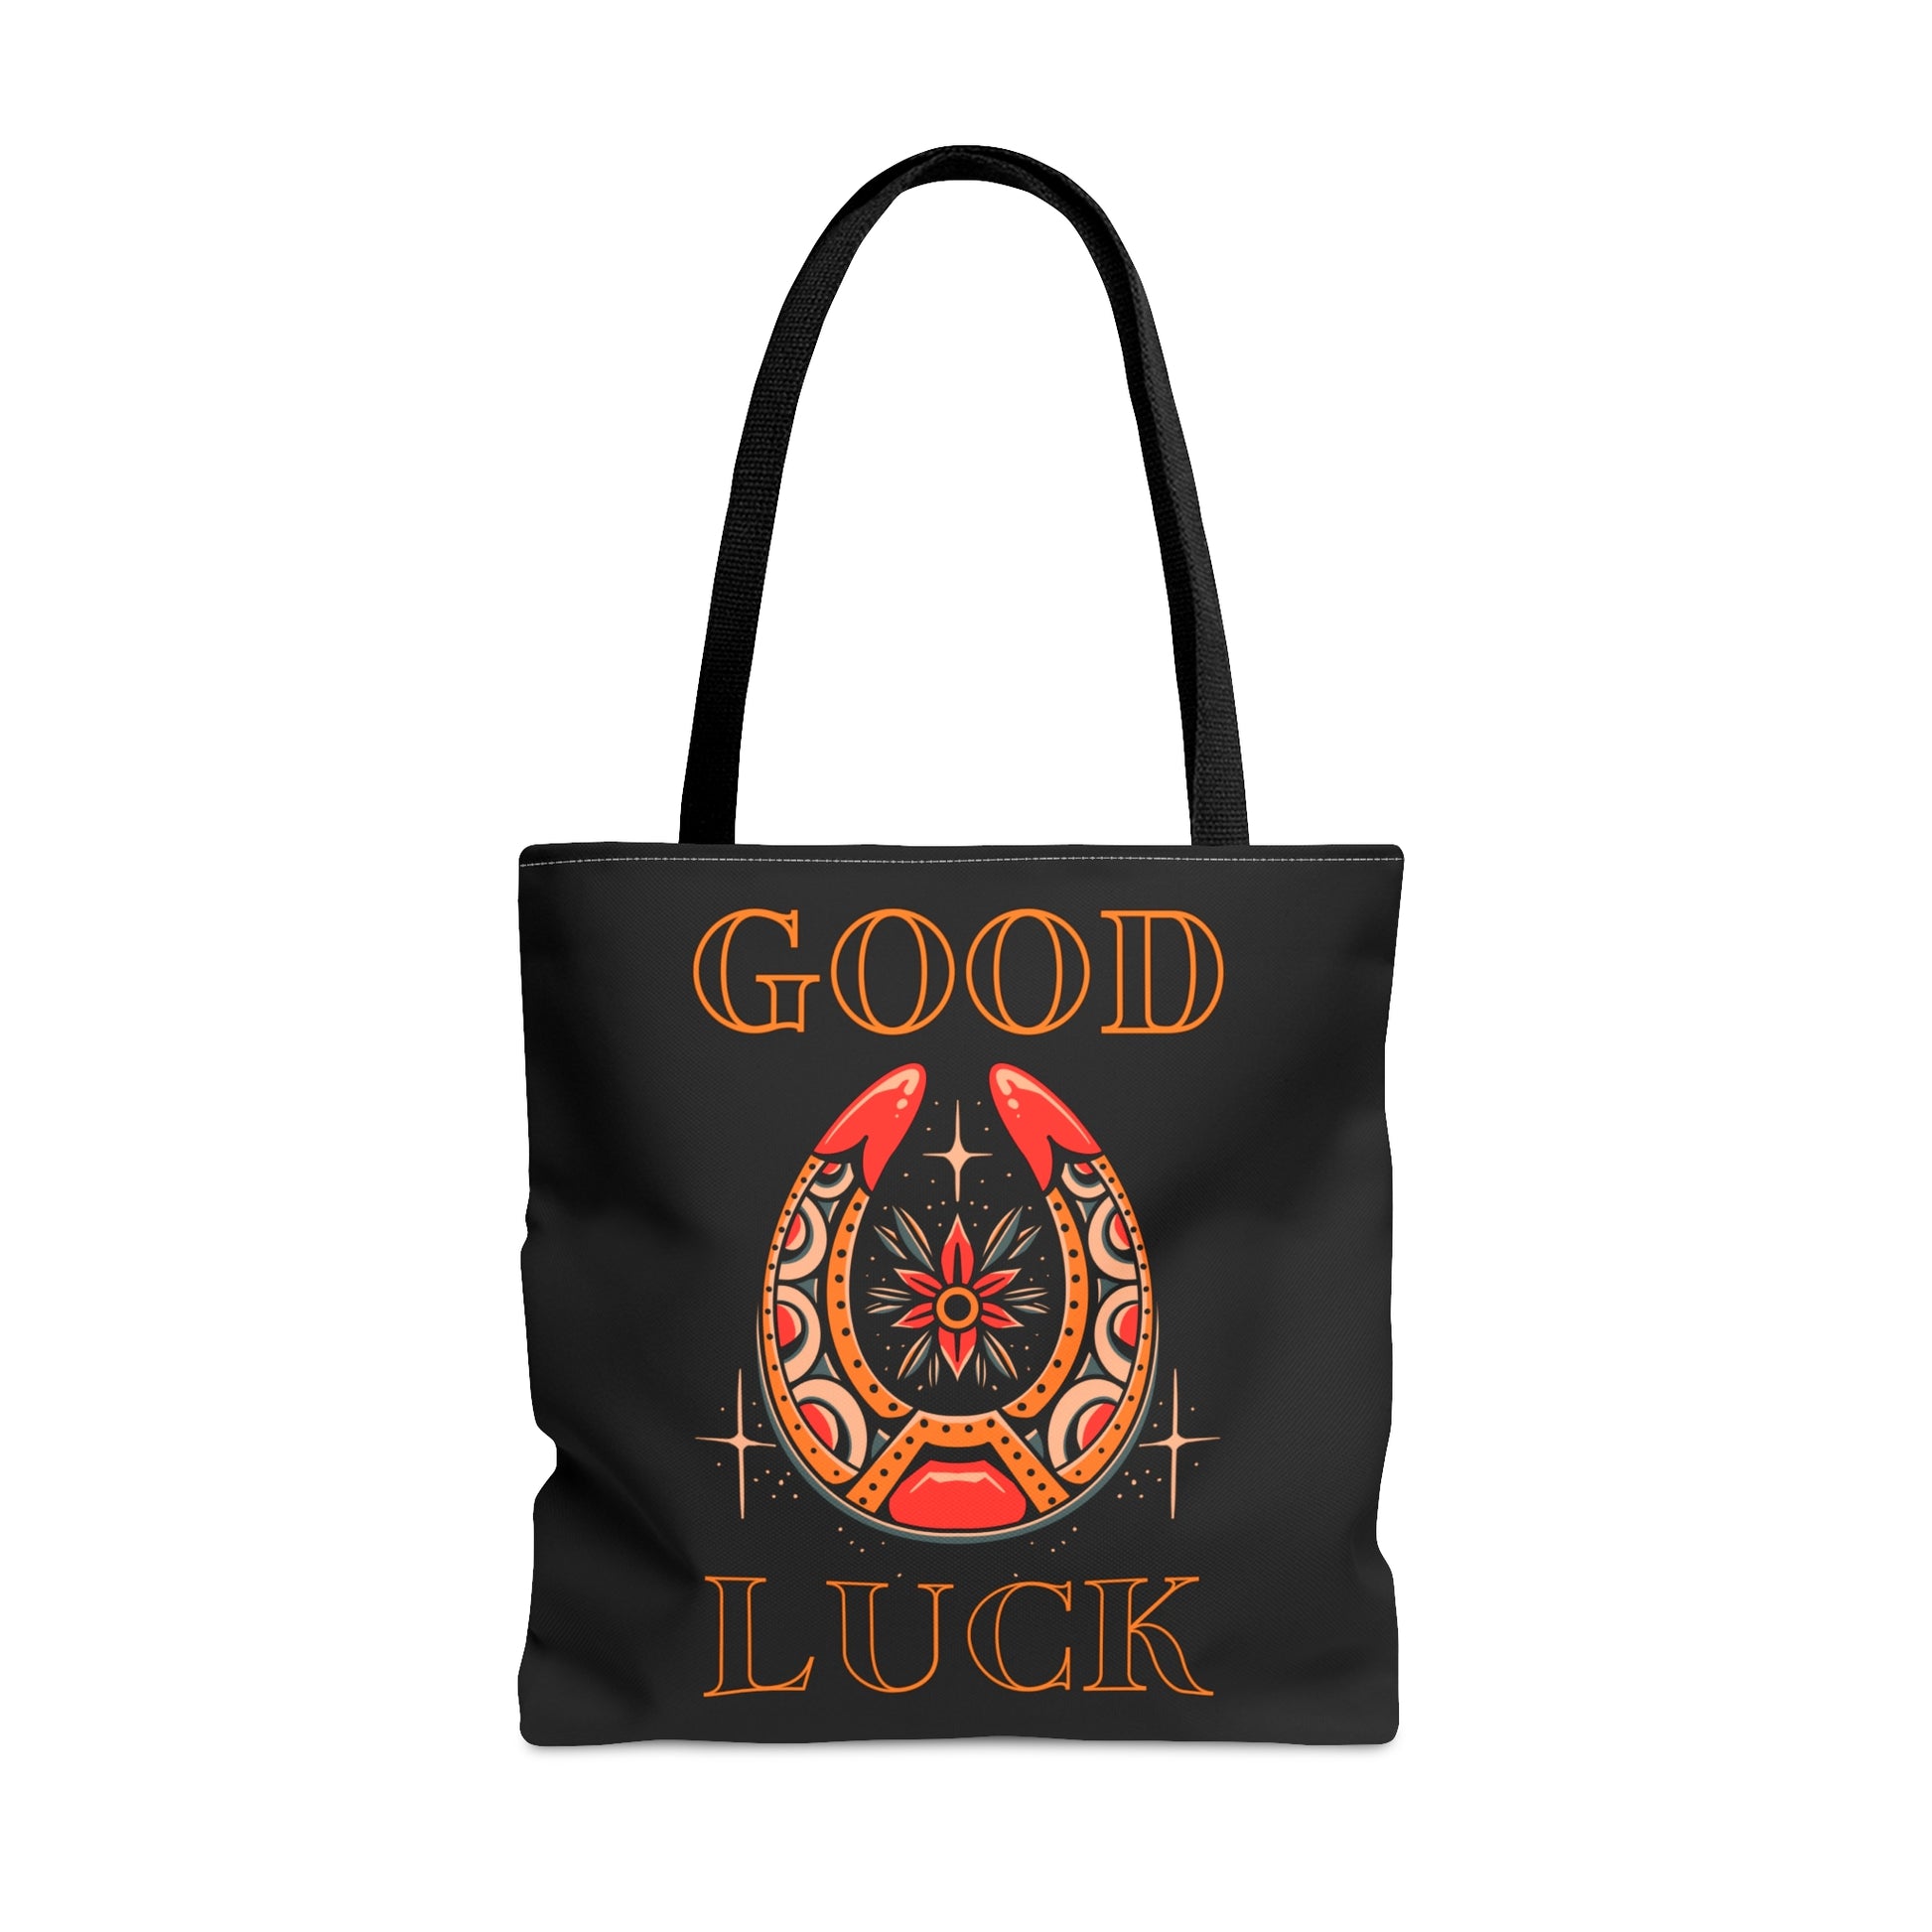 Copy of Good Luck Tattoo Tote Bag in Black / Vintage American Old School Traditional Tattoo Flash / Punk Rock Beach Shopping Bag Lucky - Foxlark Crystal Jewelry